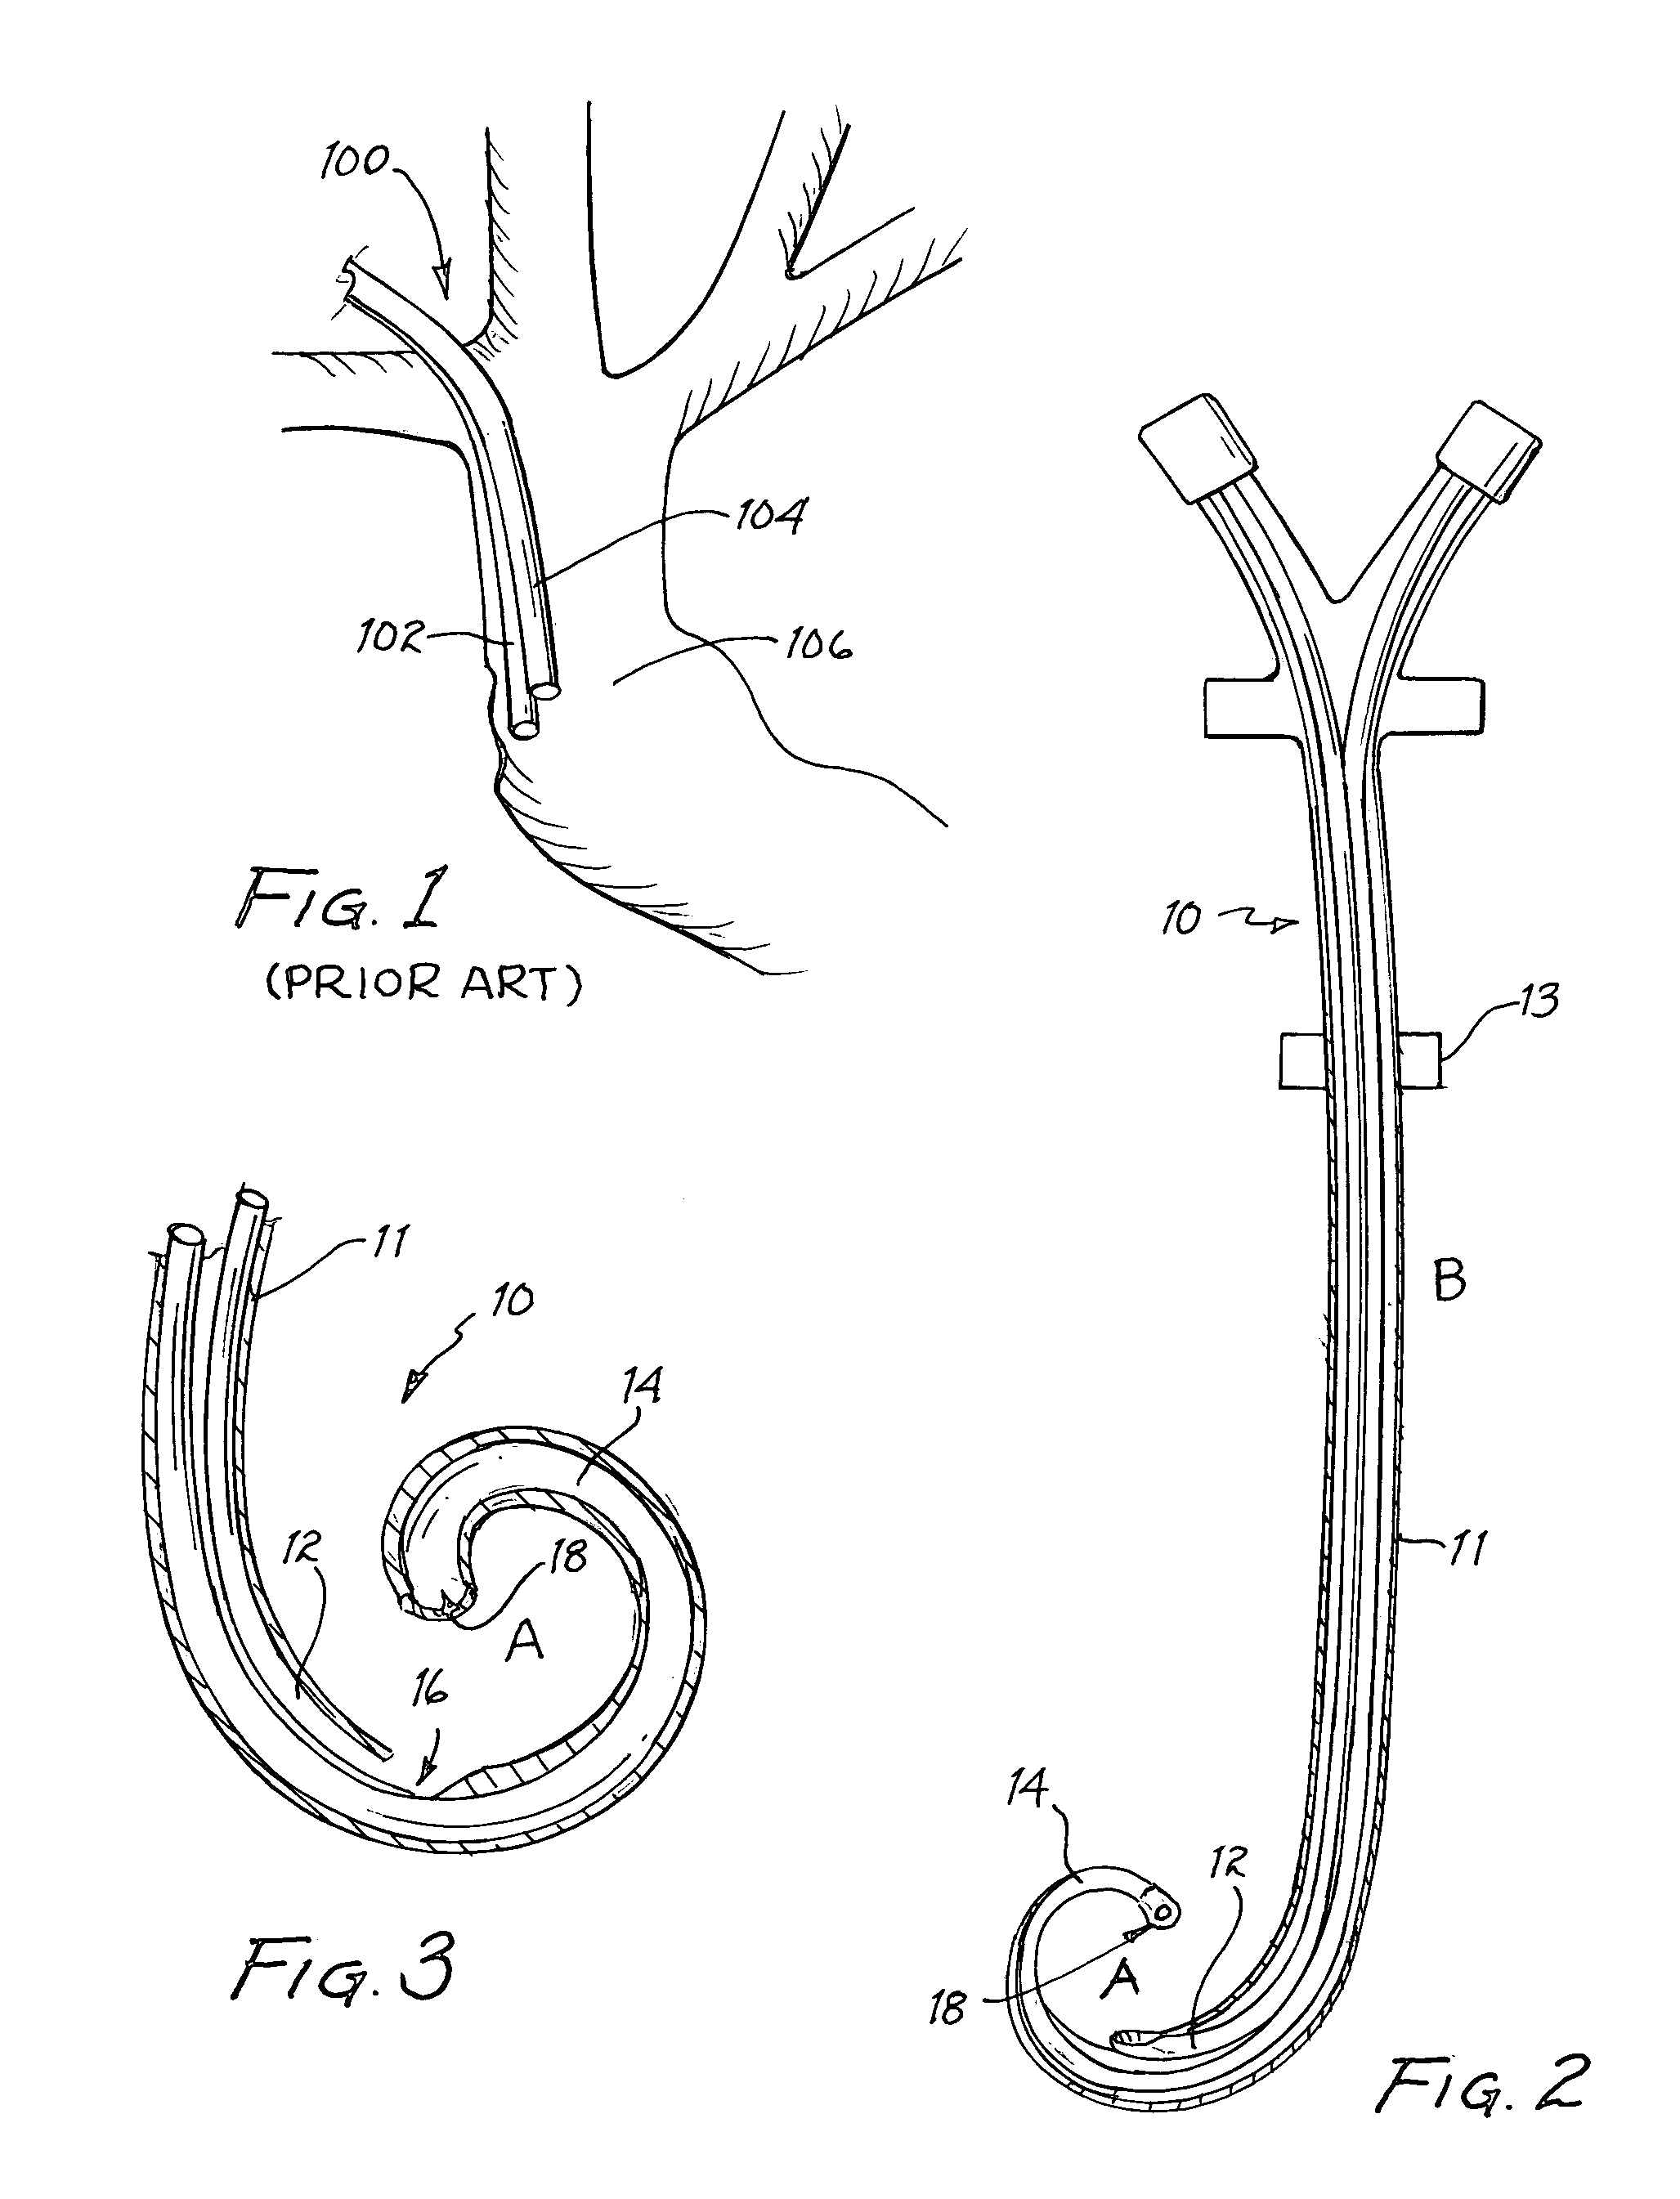 Vascular access catheter having a curved tip and method